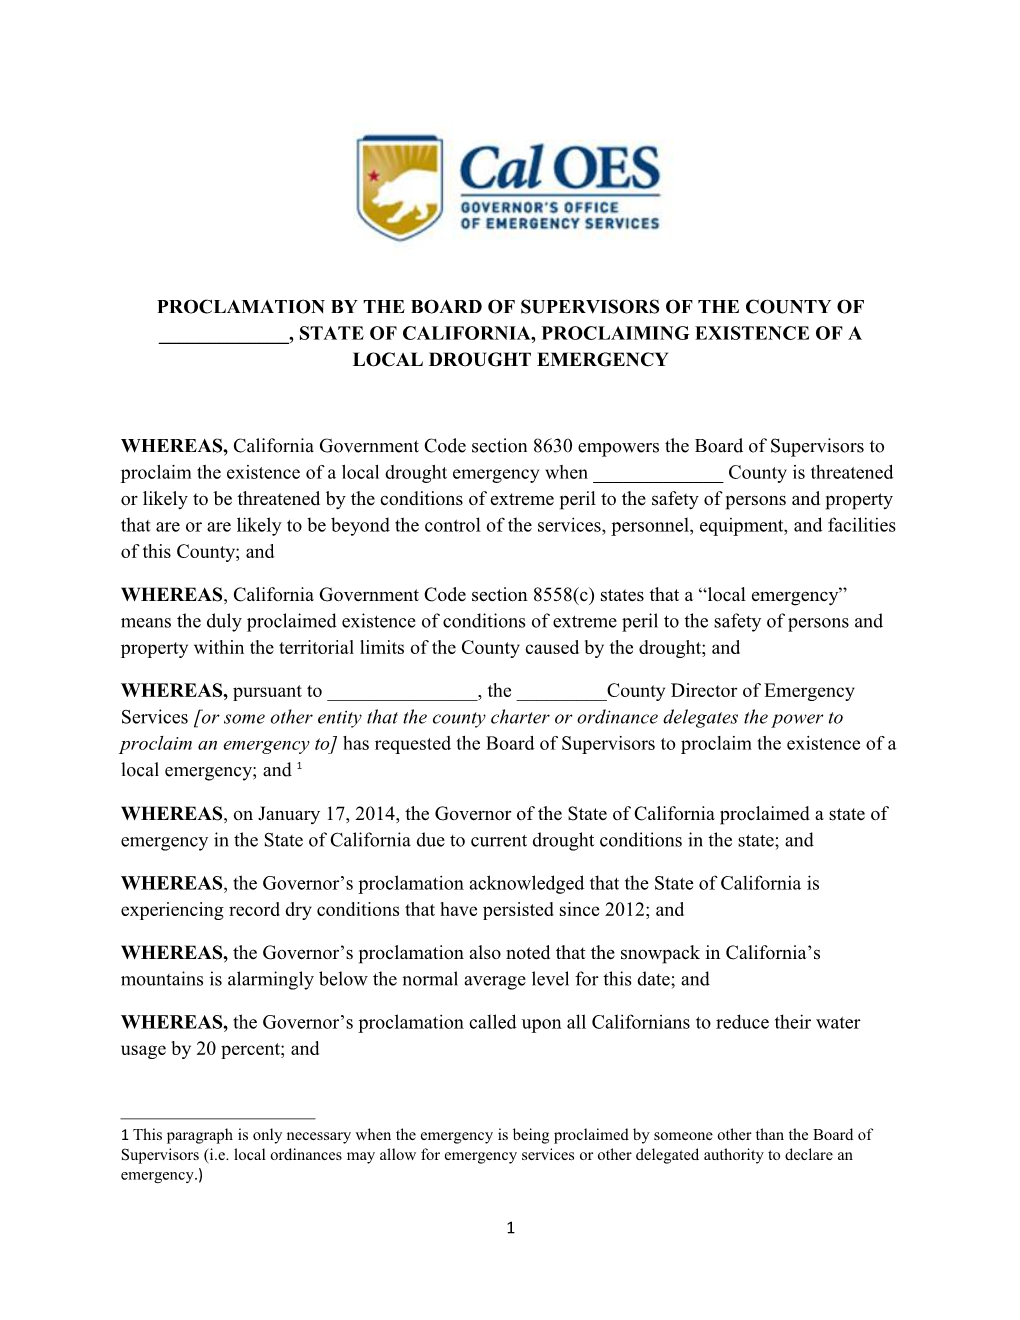 Proclamation by the Board of Supervisors of the County of ______, State of California